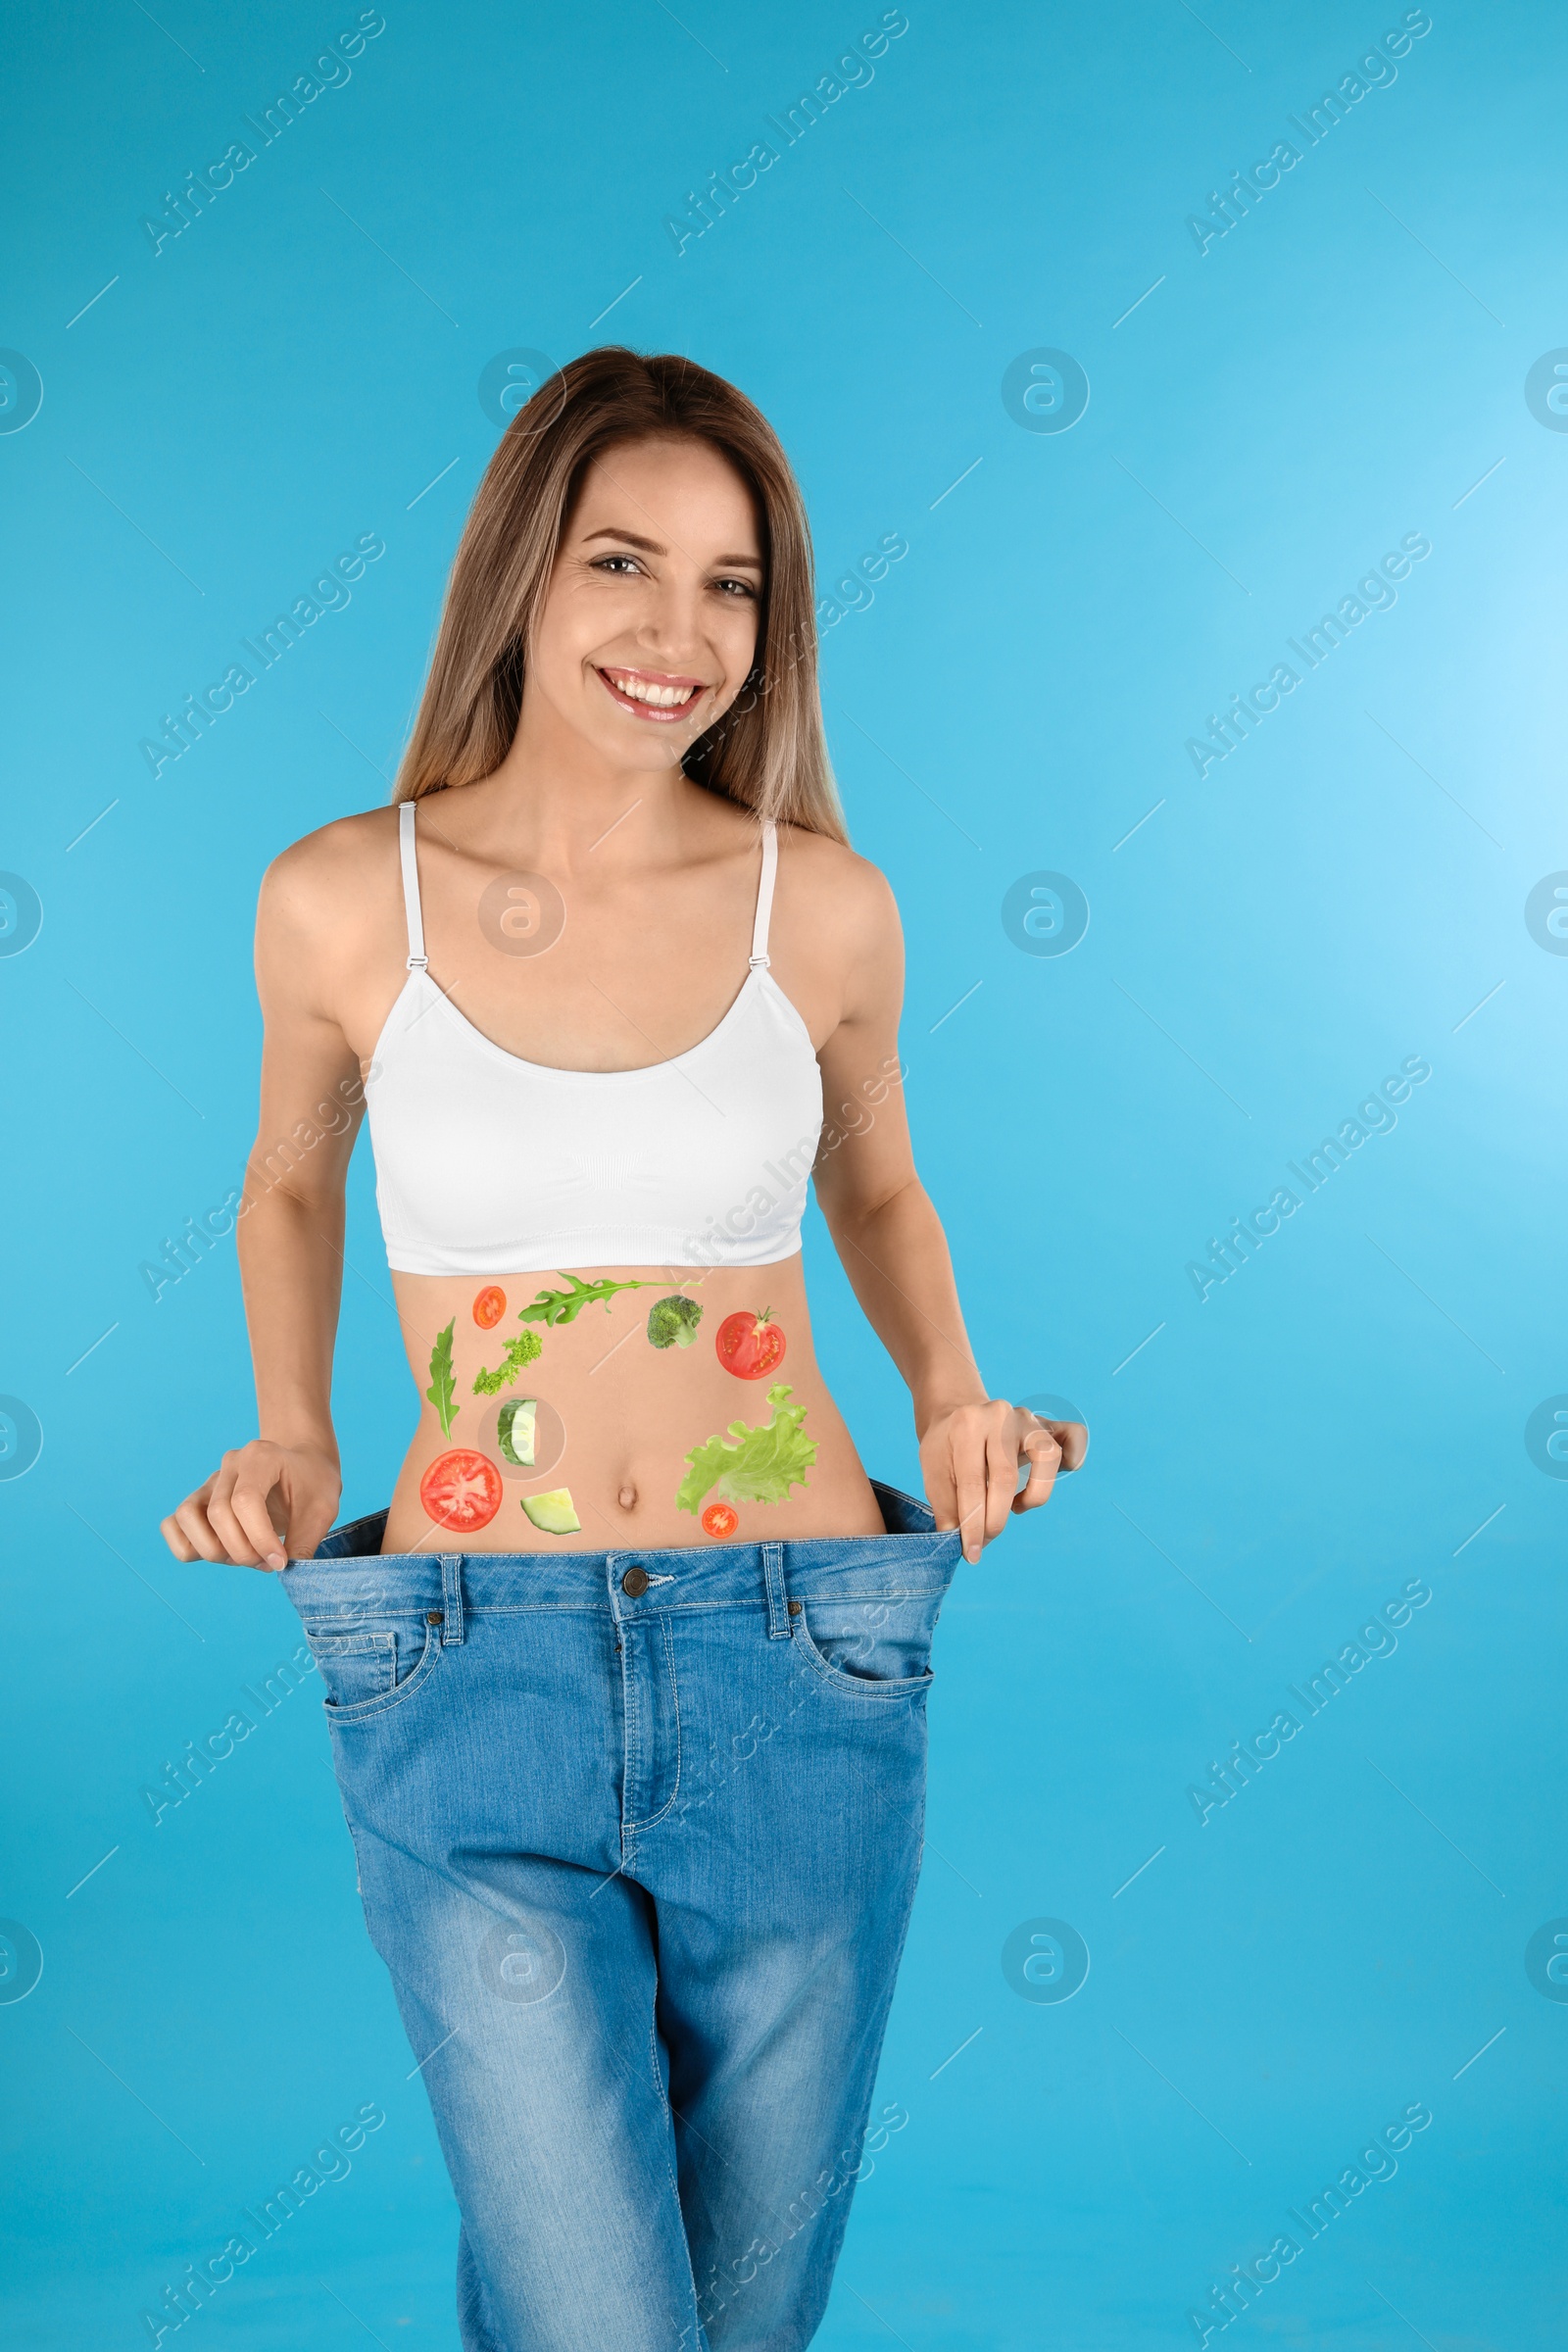 Image of Slim woman in oversized jeans and images of vegetables on her belly against turquoise background. Healthy eating